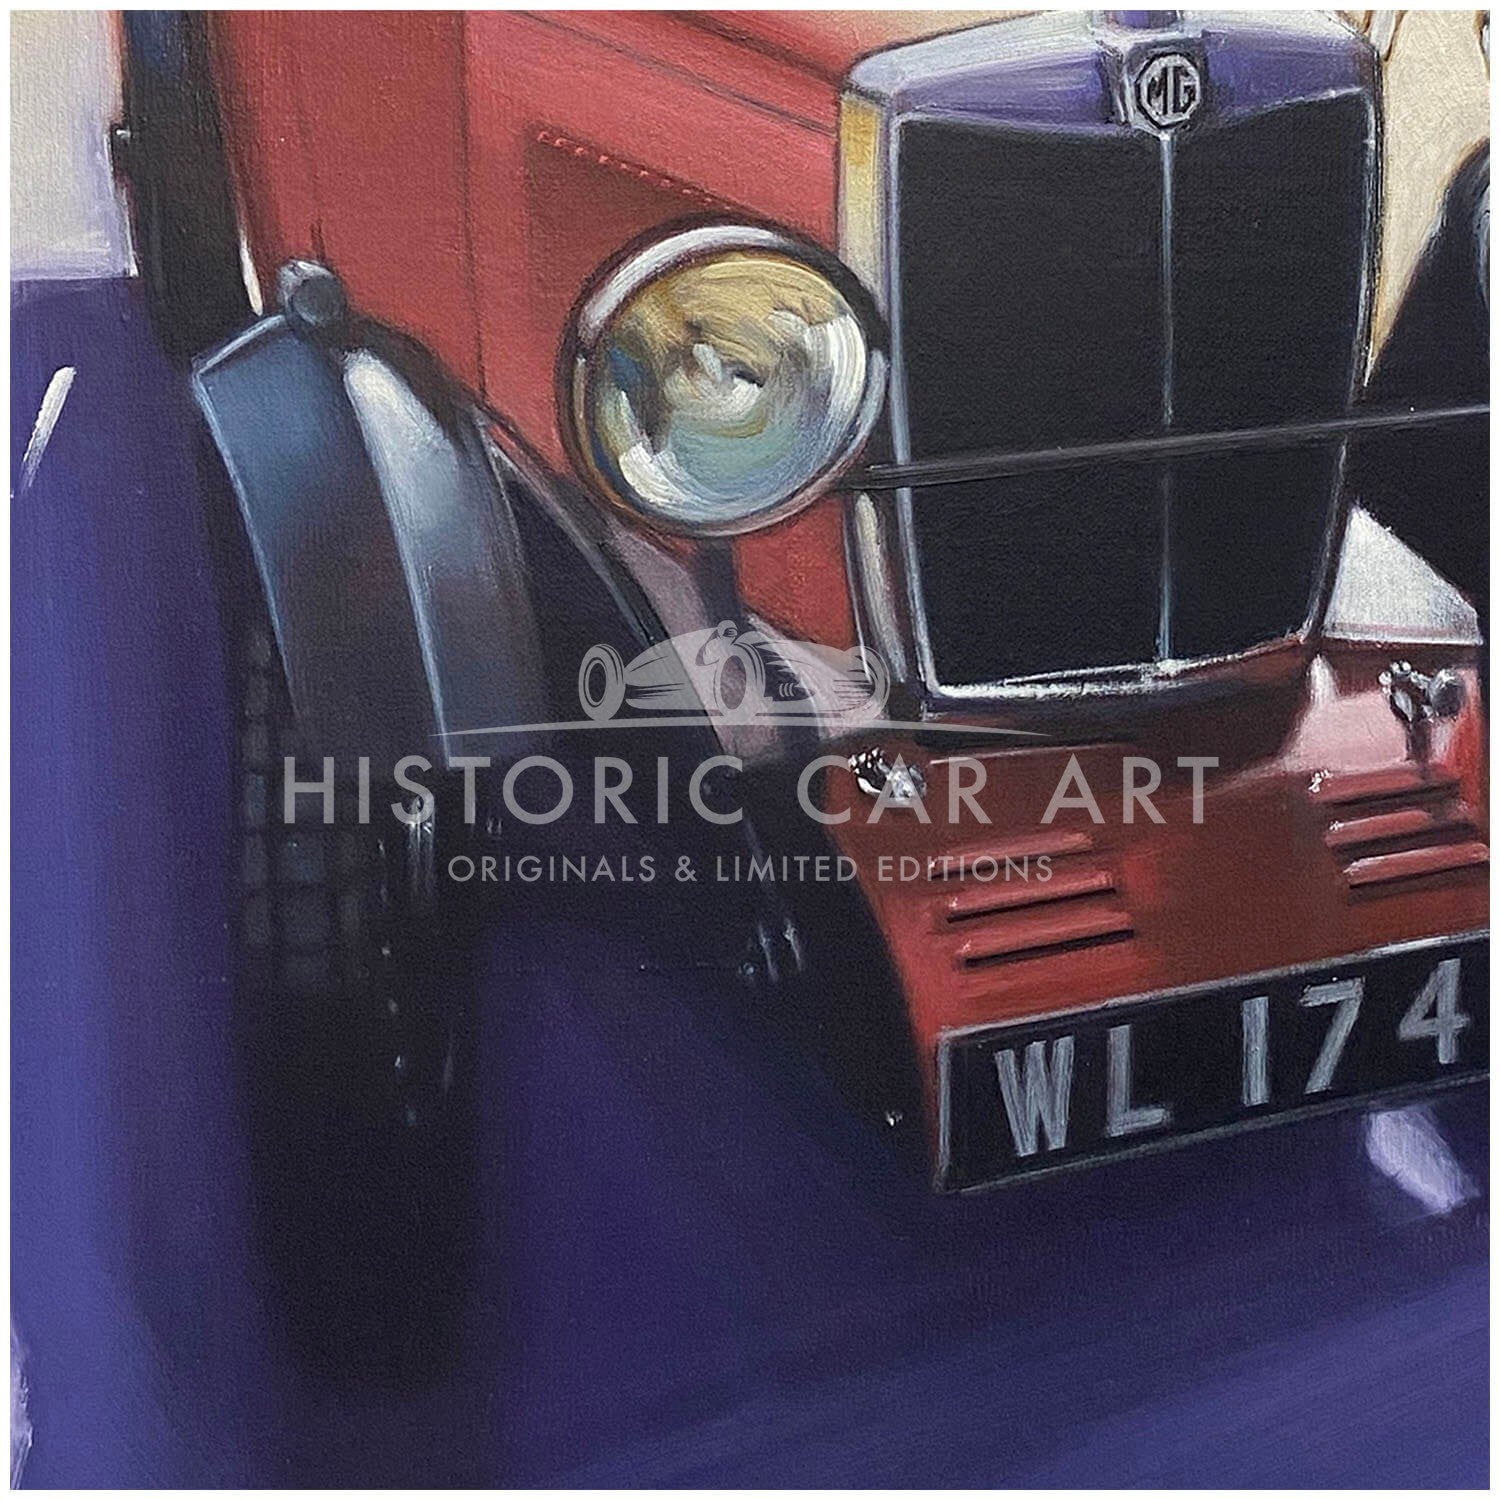 First on the Beach | 1932 MG Midget with Dalmatian | Artwork